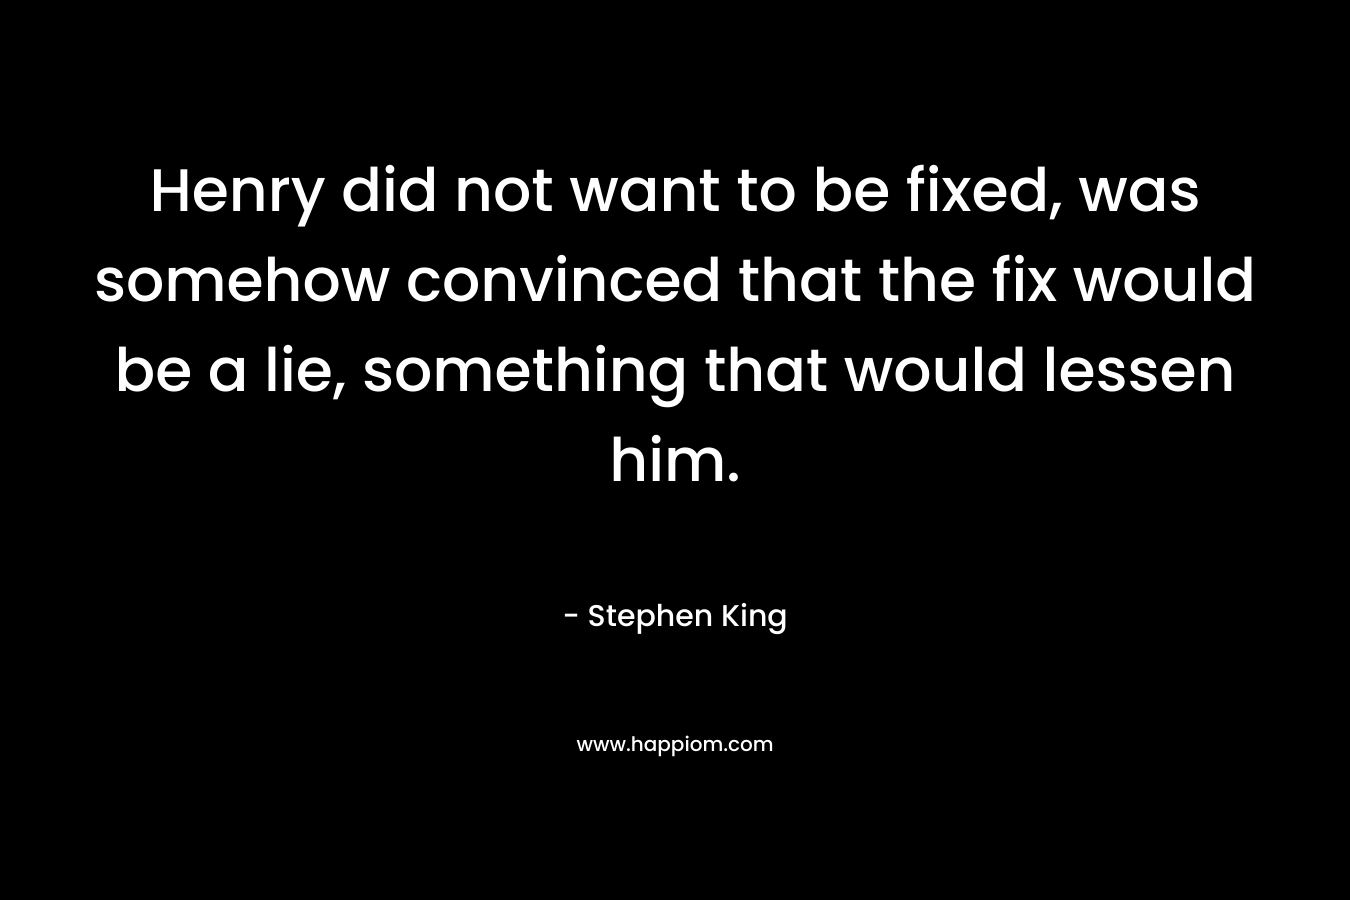 Henry did not want to be fixed, was somehow convinced that the fix would be a lie, something that would lessen him. – Stephen King